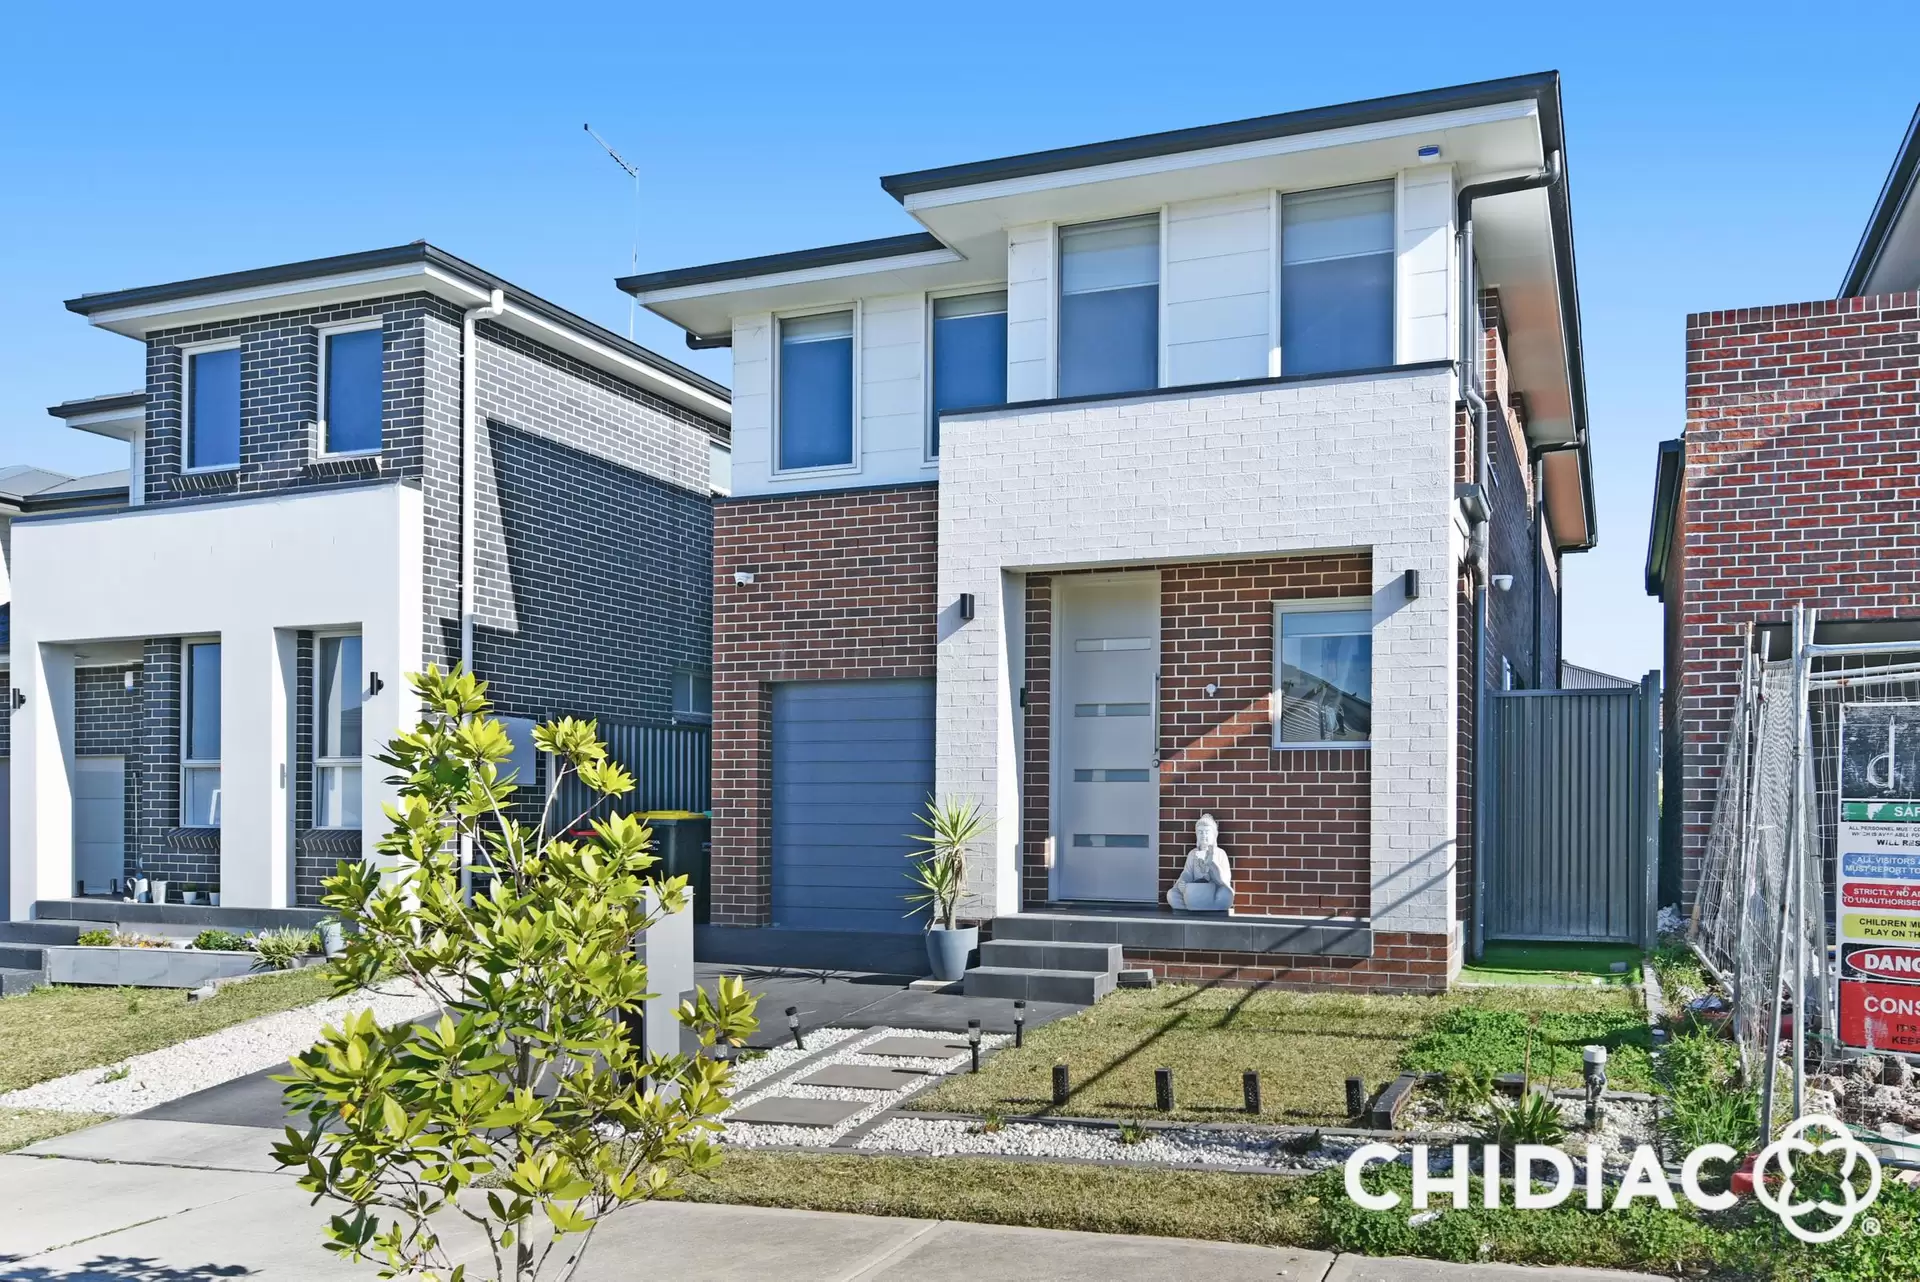 8 Barabung Street, Austral Leased by Chidiac Realty - image 1